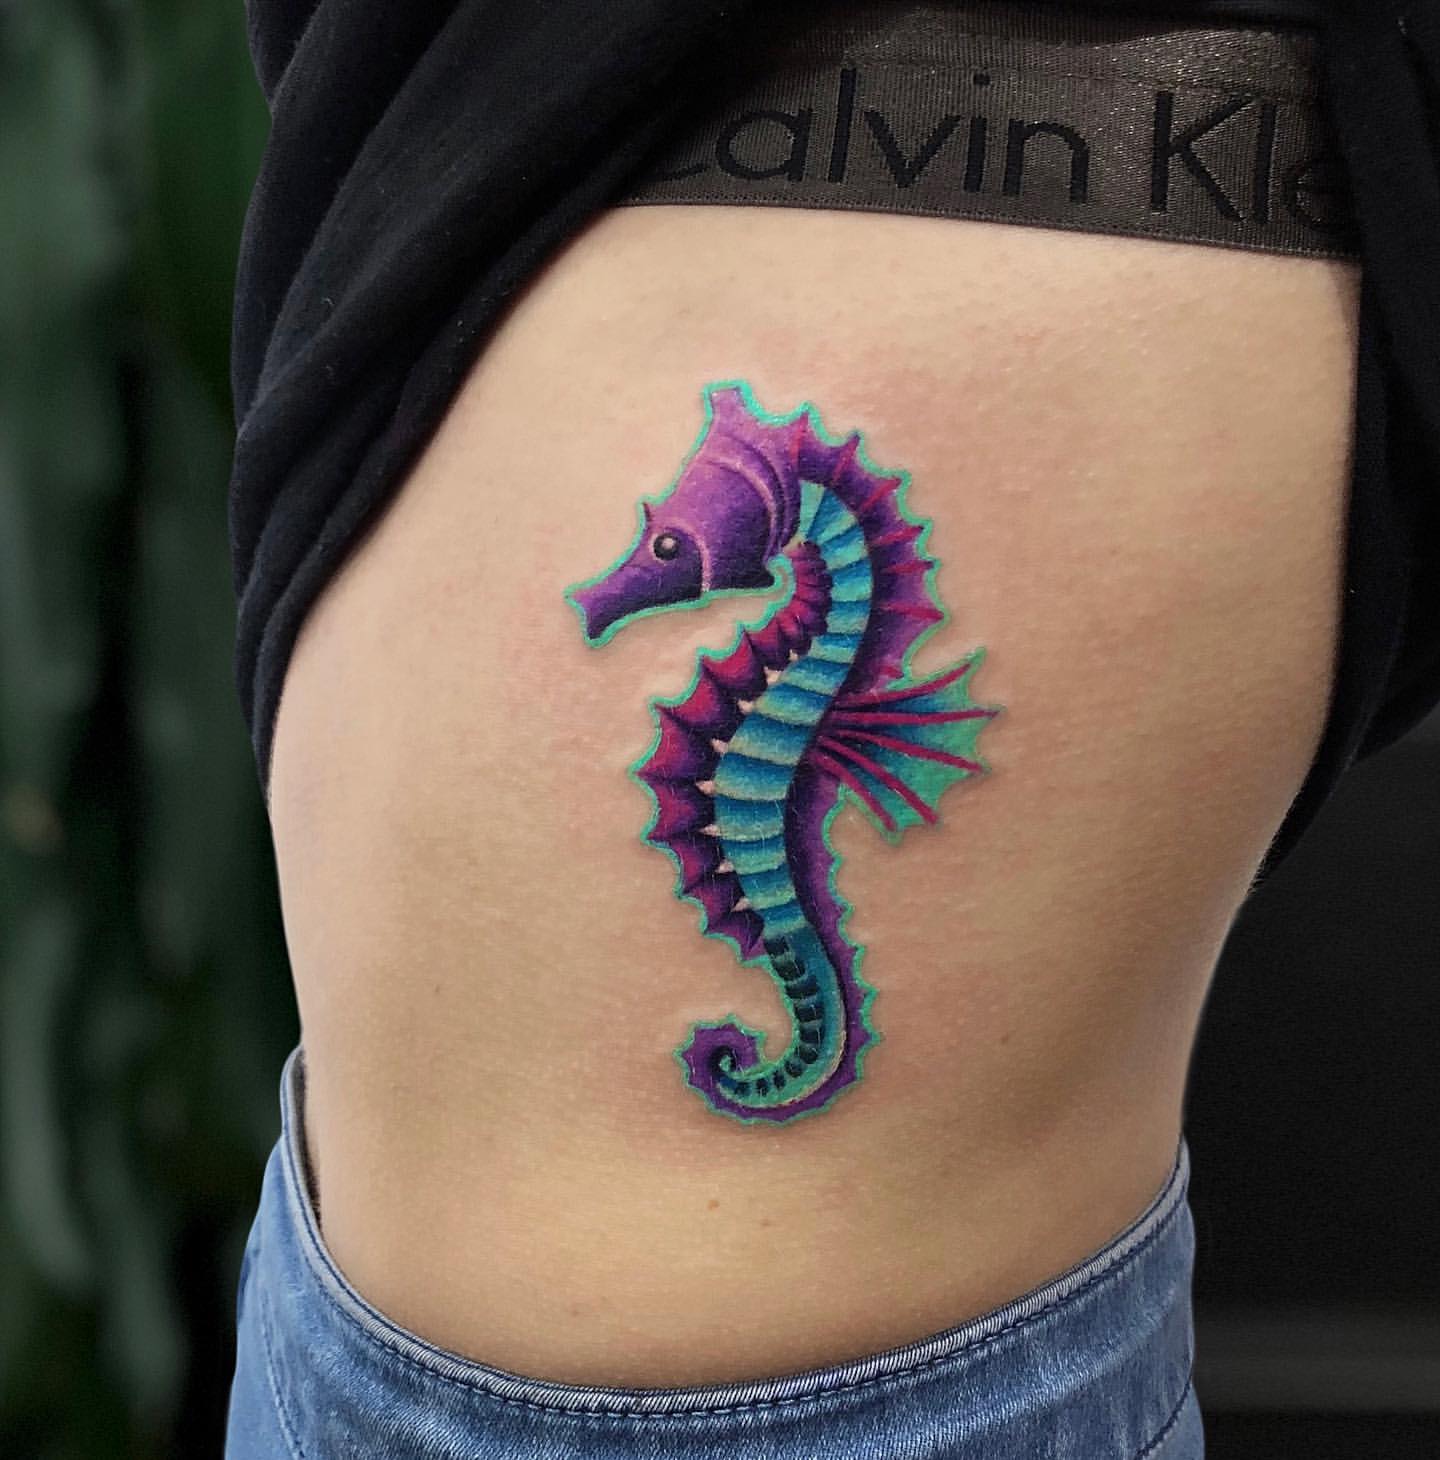 30 Vibrant and Captivating Seahorse Tattoo Ideas for Men & Women in 2023